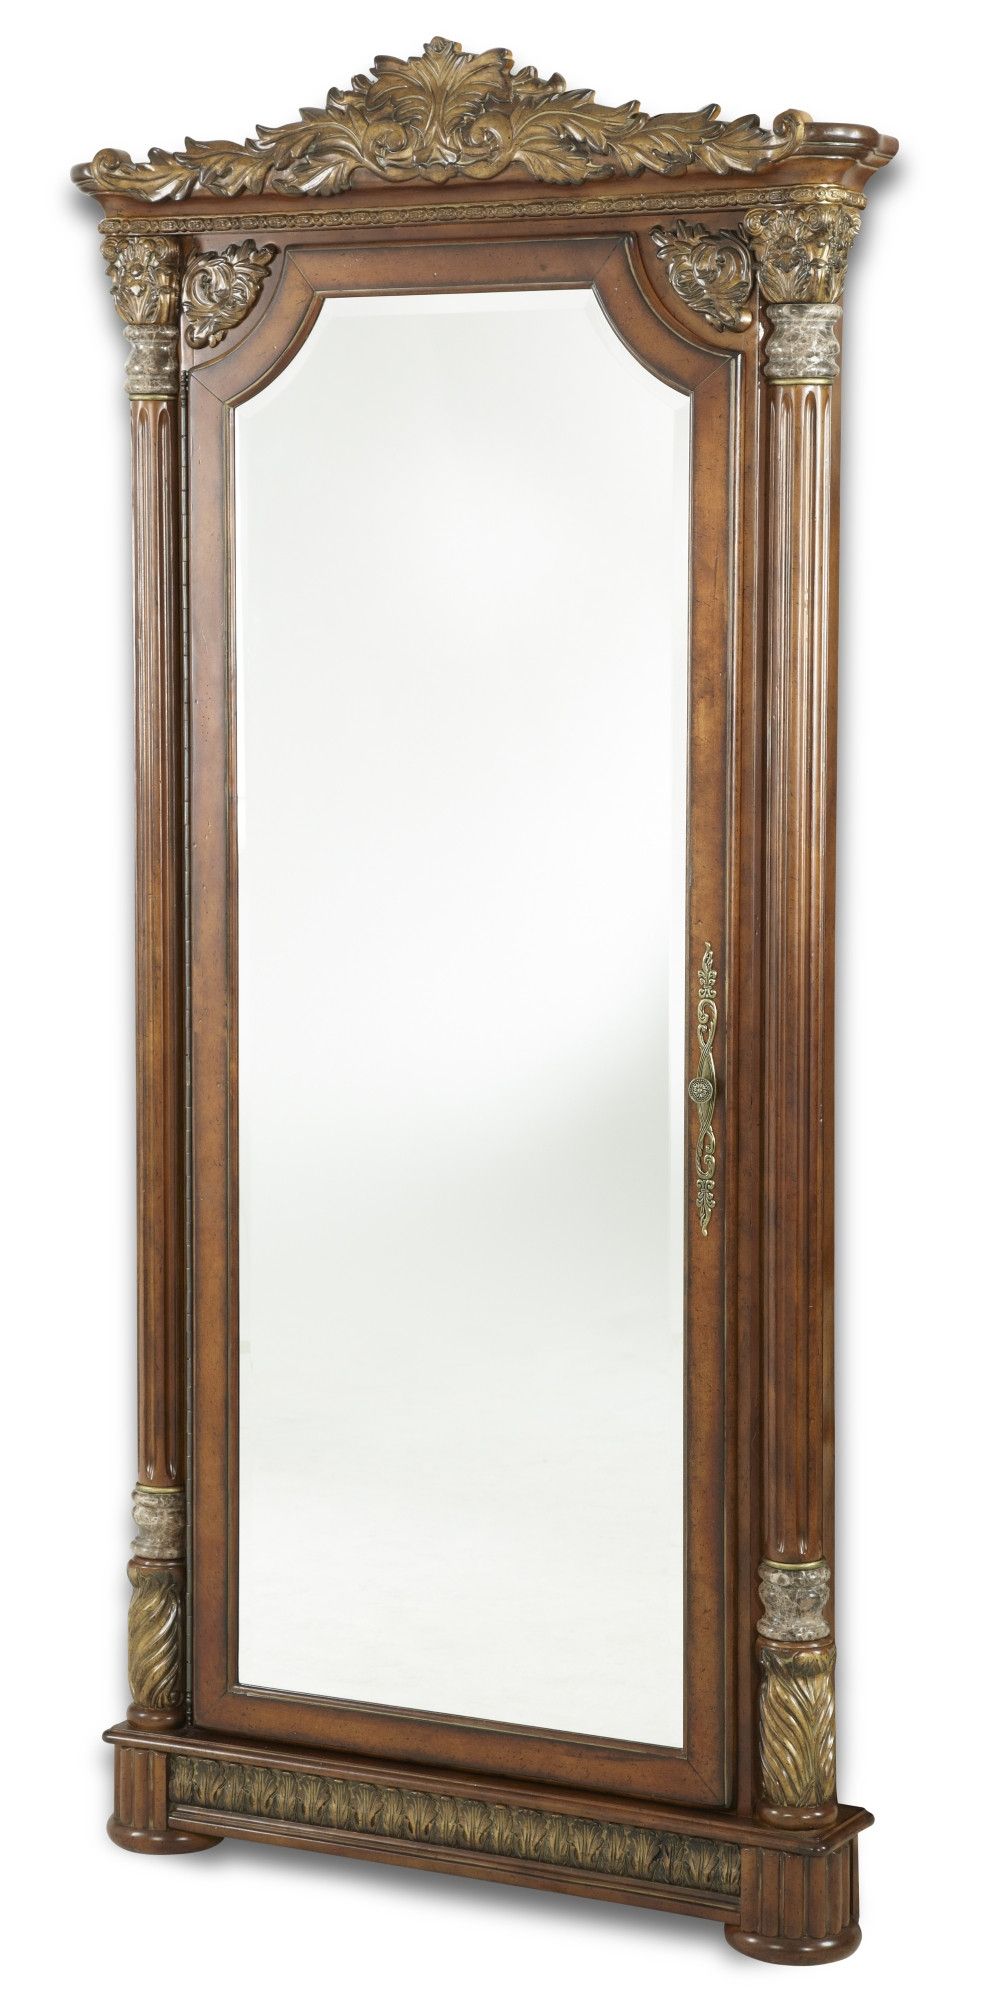 Aico Villa Valencia Wall Accent Mirror W/storage 72062 55 Within Tellier Accent Wall Mirrors (View 15 of 15)